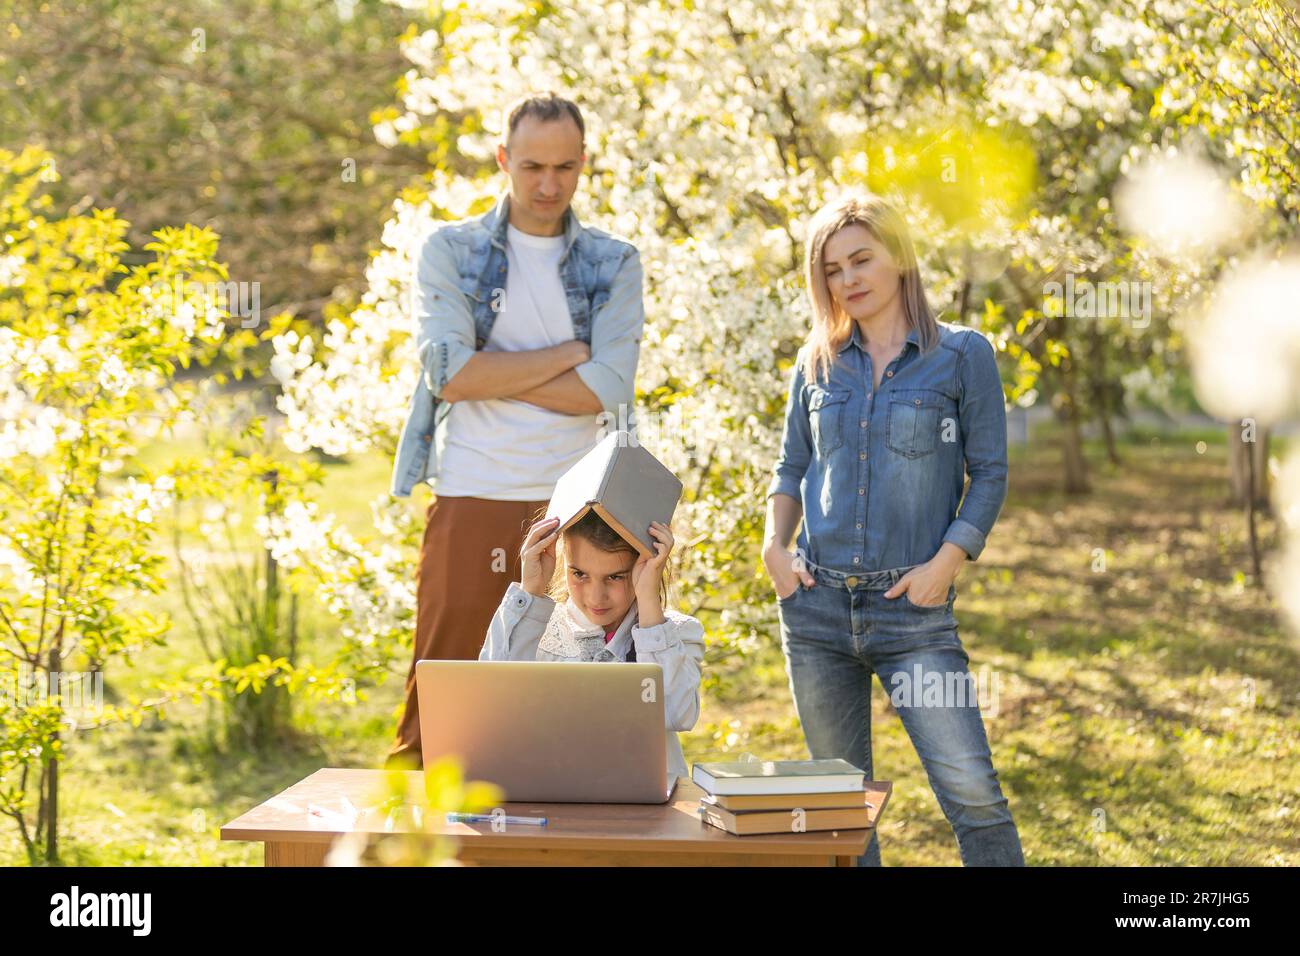 little girl with strict parents studying on laptop outdoor Stock Photo